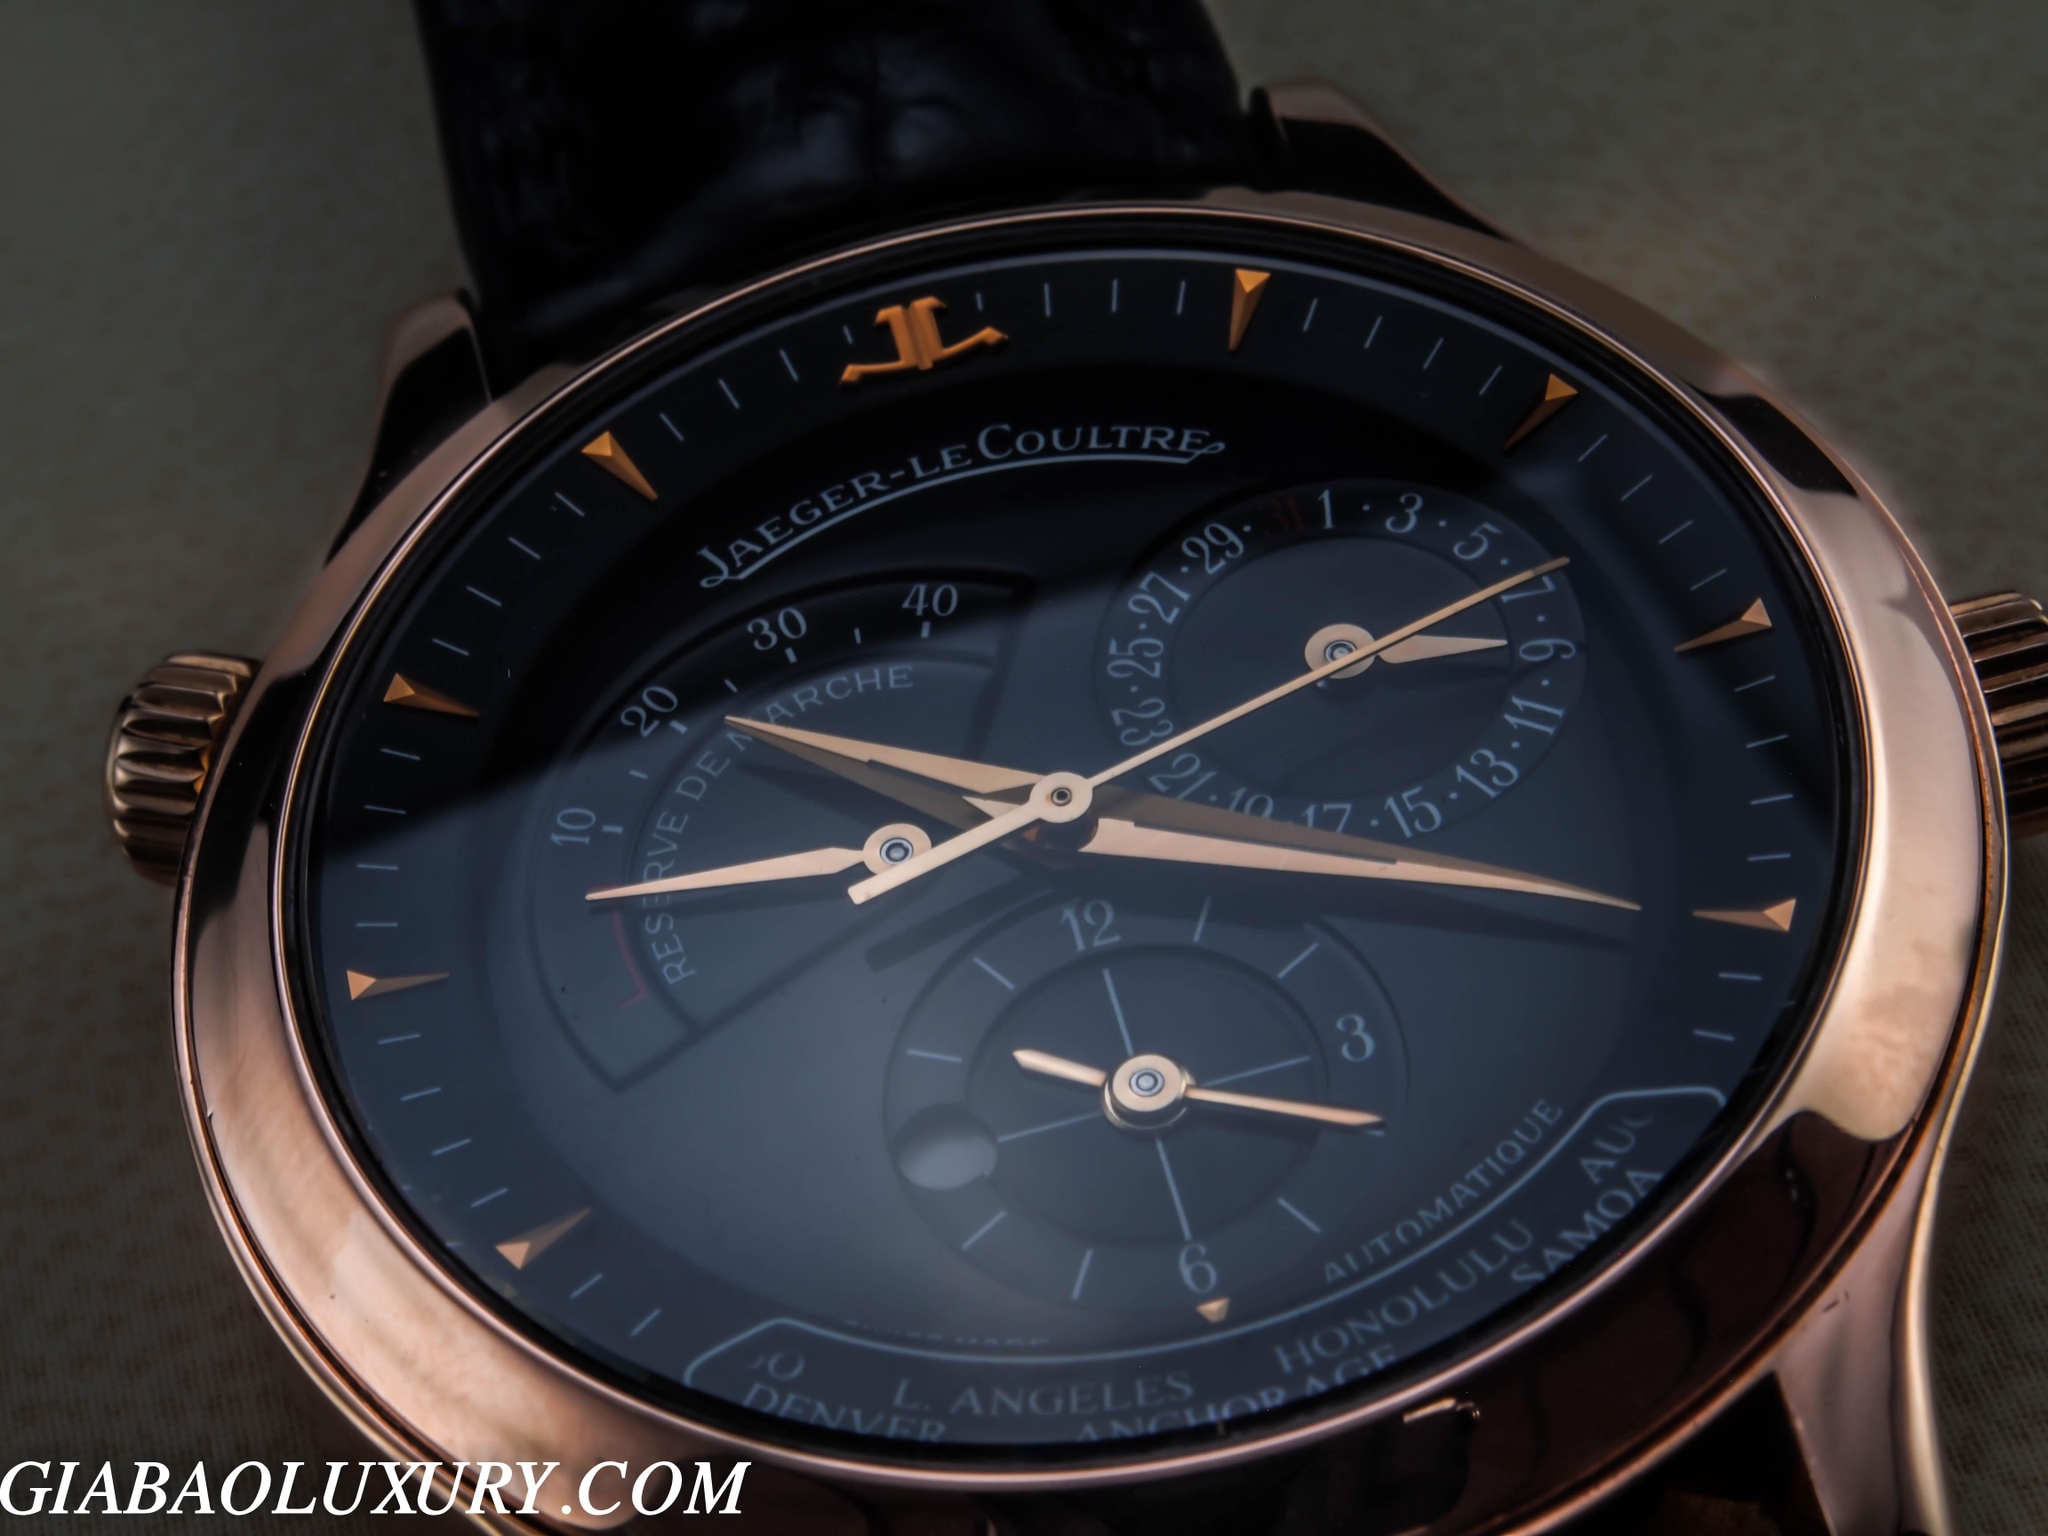 REVIEW ĐỒNG HỒ JAEGER - LECOULTRE MASTER CONTROL 1000 HOUR GEOGRAPHIC  18K  ROSE GOLD BỞI GIA BẢO LUXURY WATCH